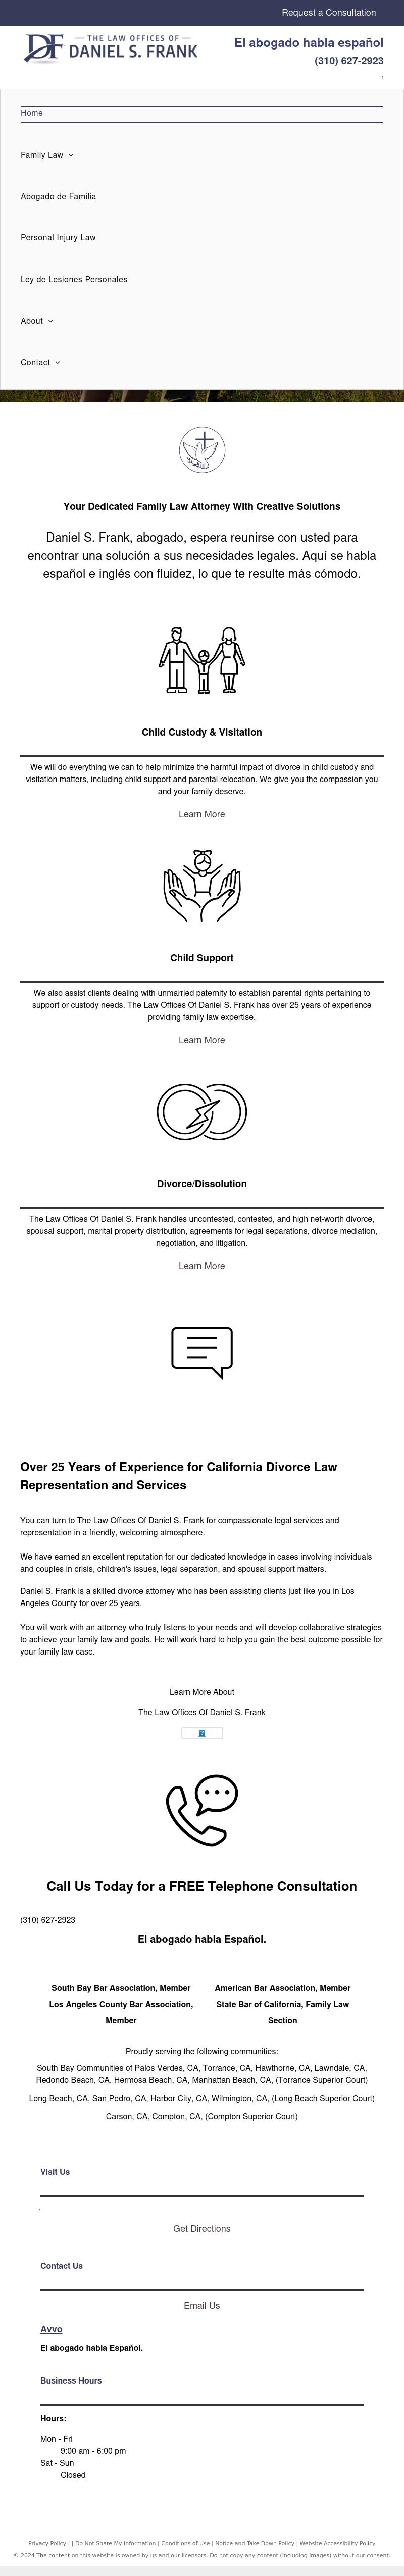 The Law Offices of Daniel S. Frank - Torrance CA Lawyers